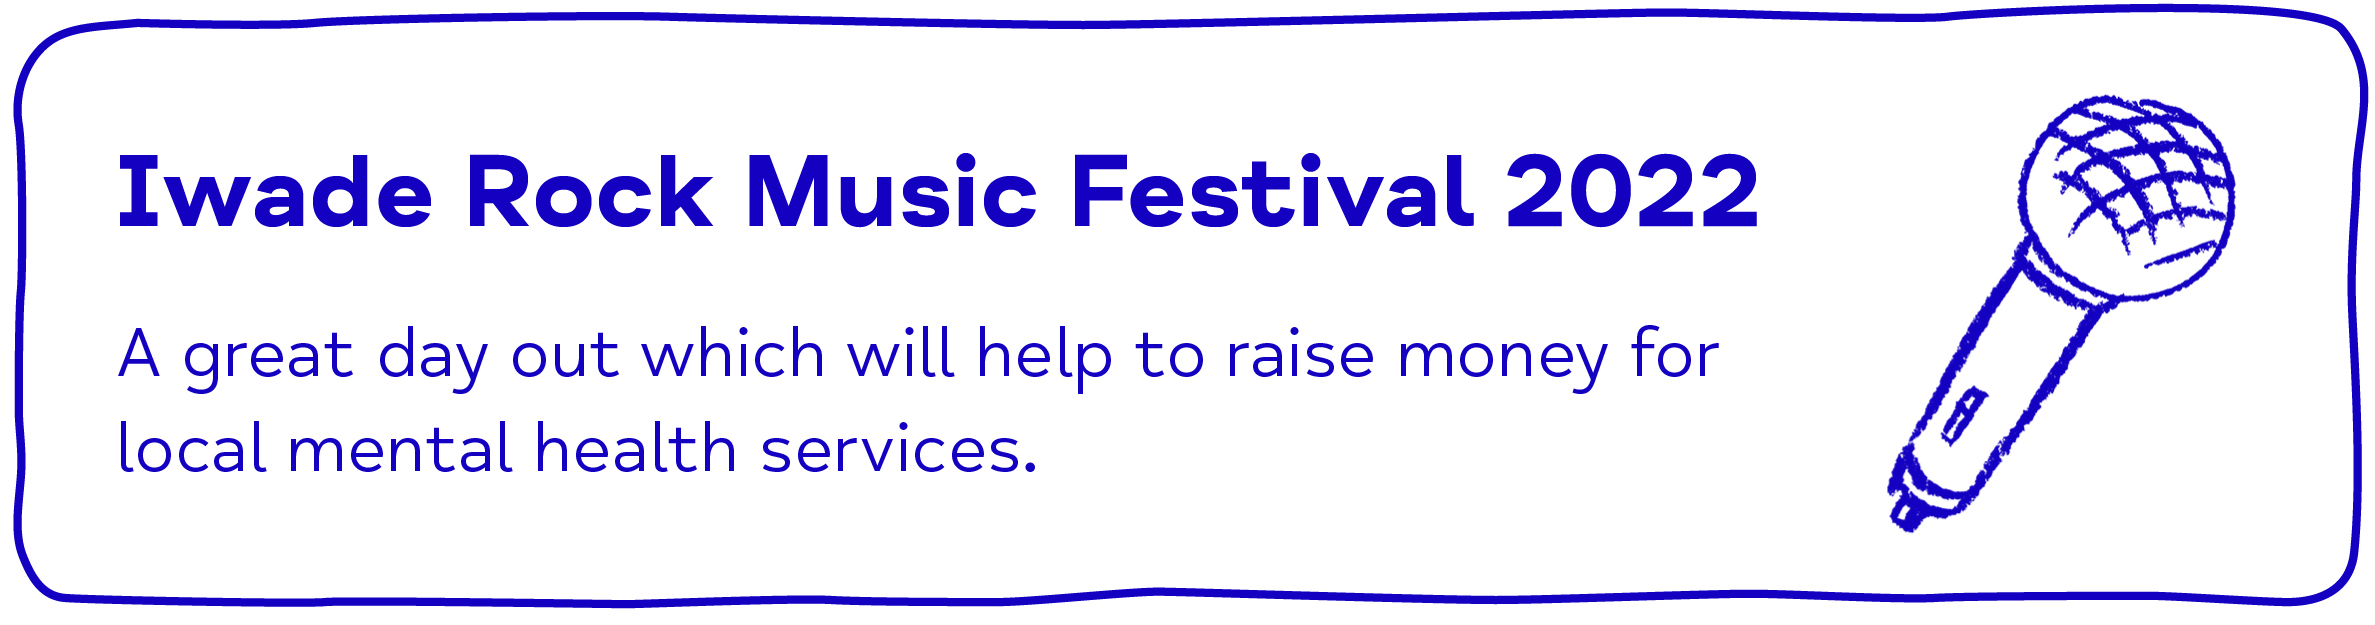 Iwade Rock Music Festival 2022 A great day out which will help to raise money for local mental health services.